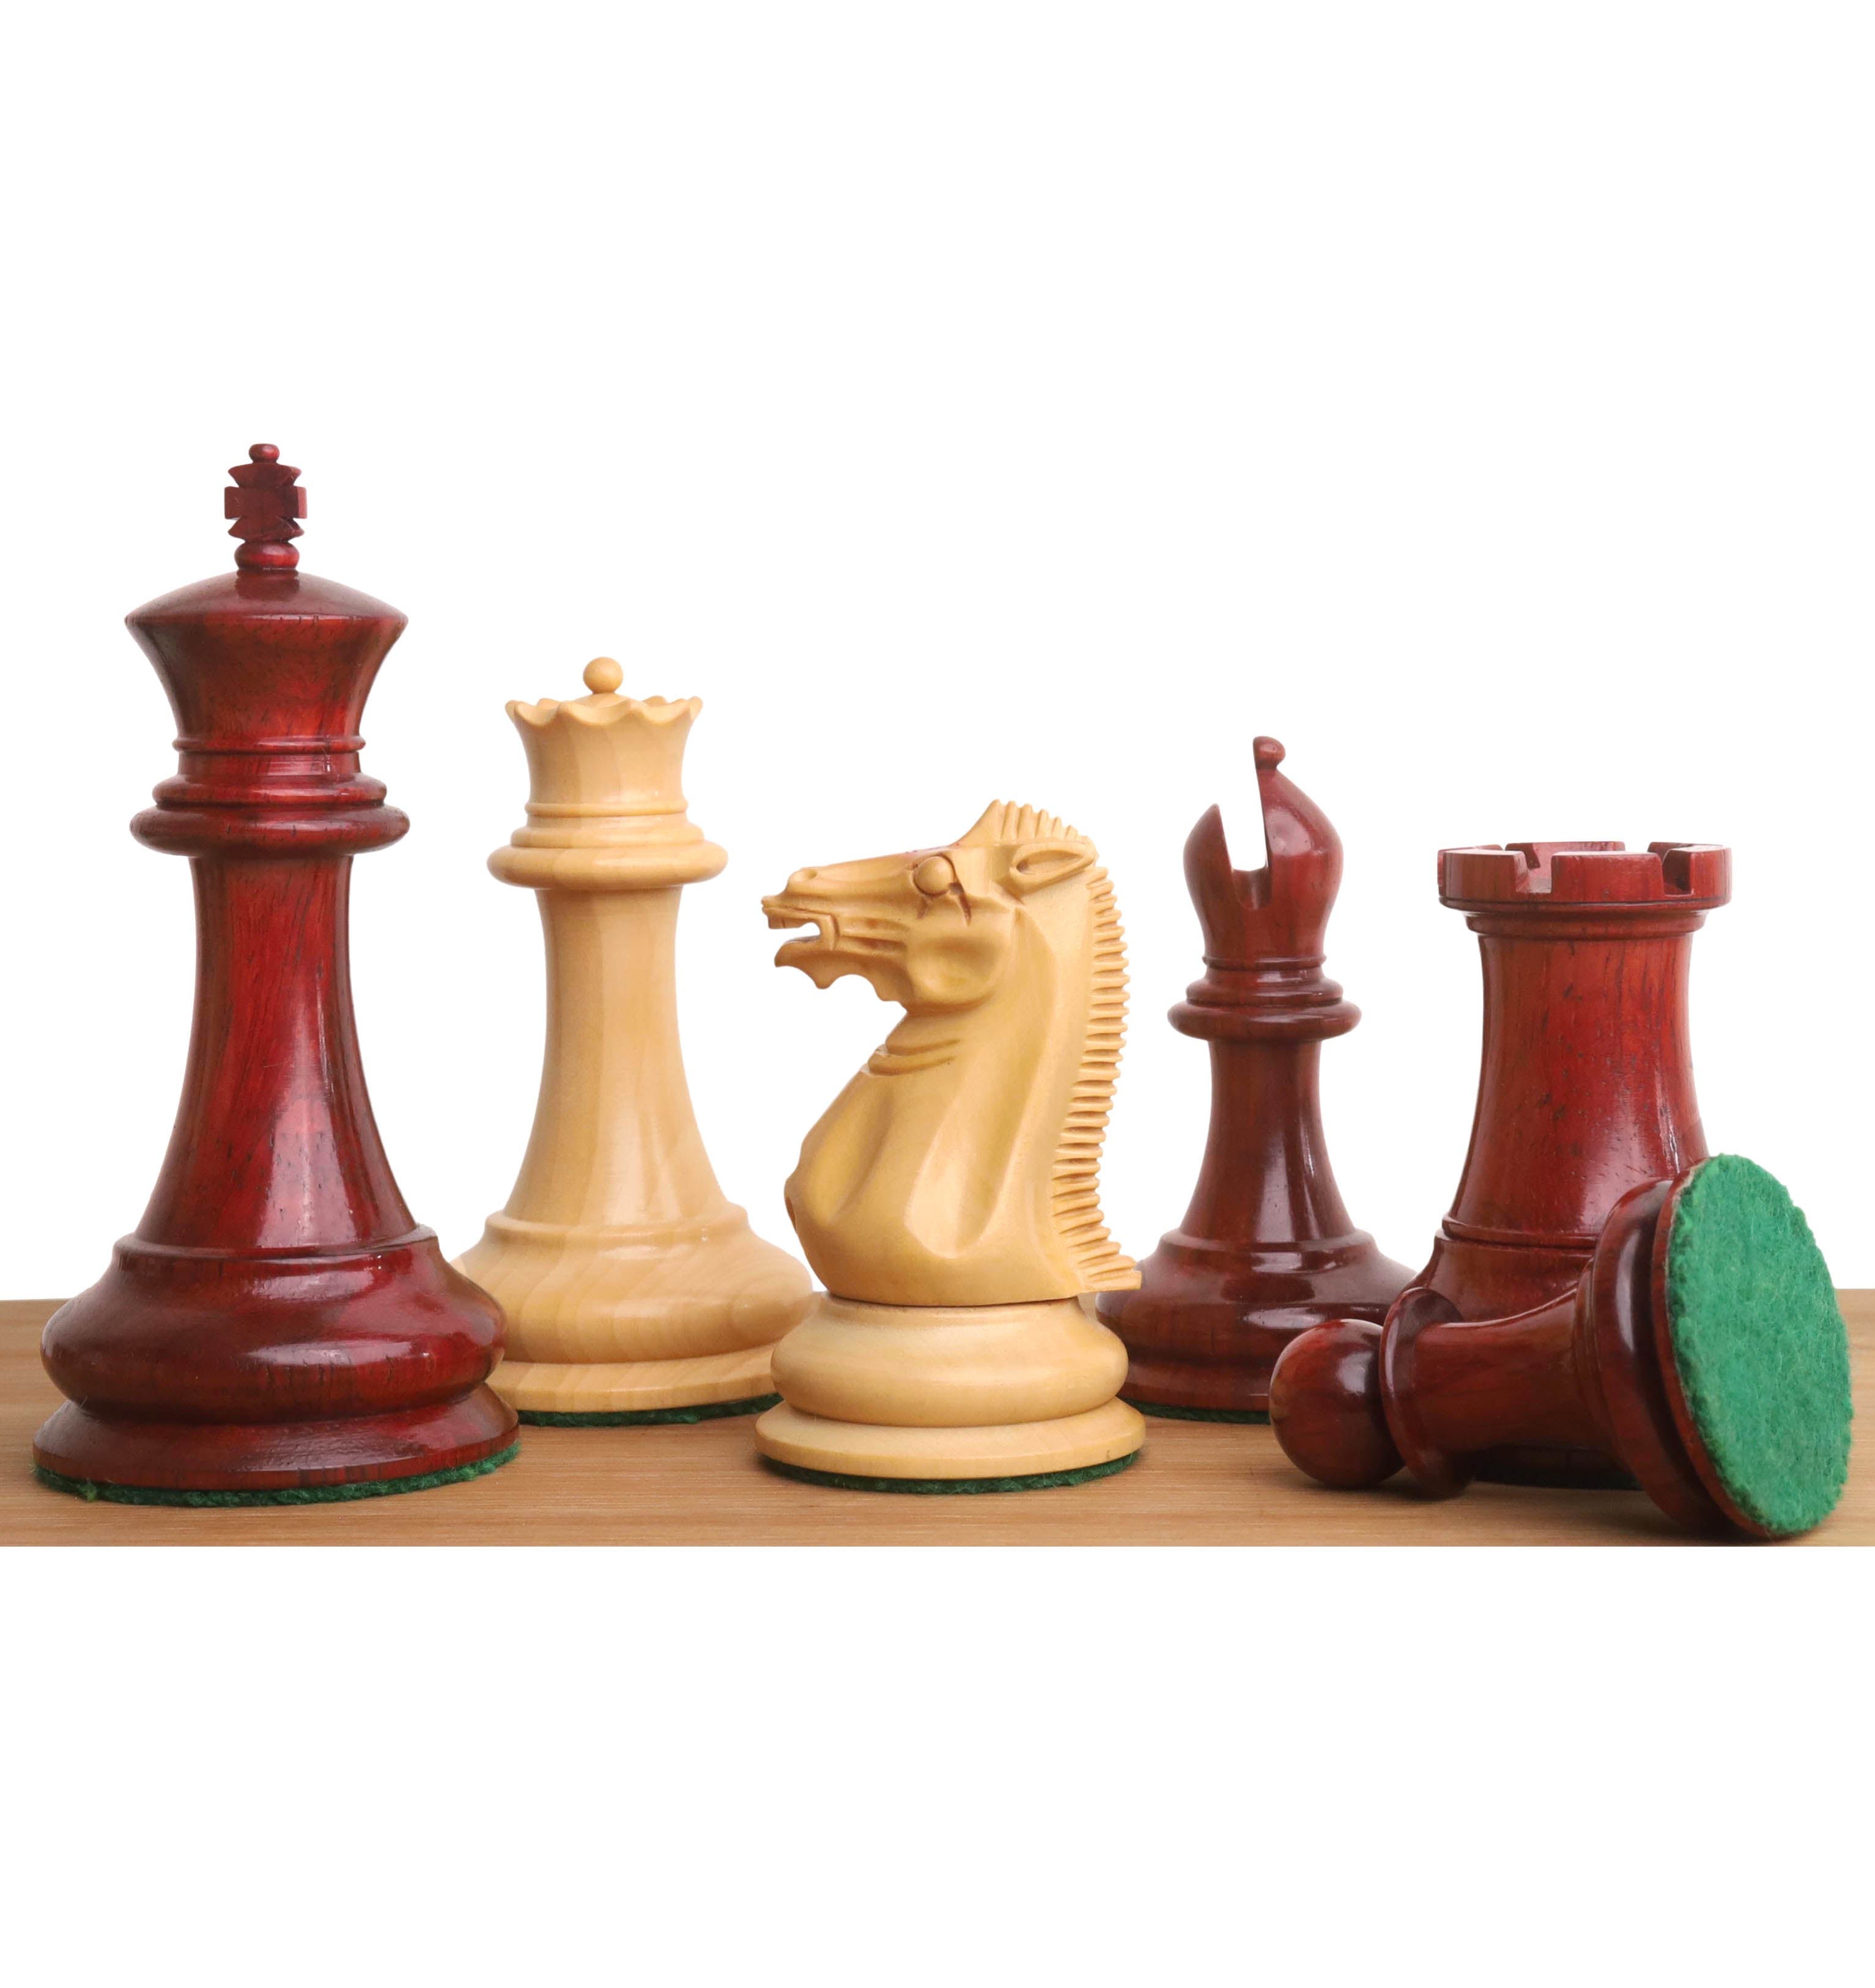 1849 Jacques Cook Staunton Chess Pieces Only Collectors set- Bud Rosewood - 3.75"